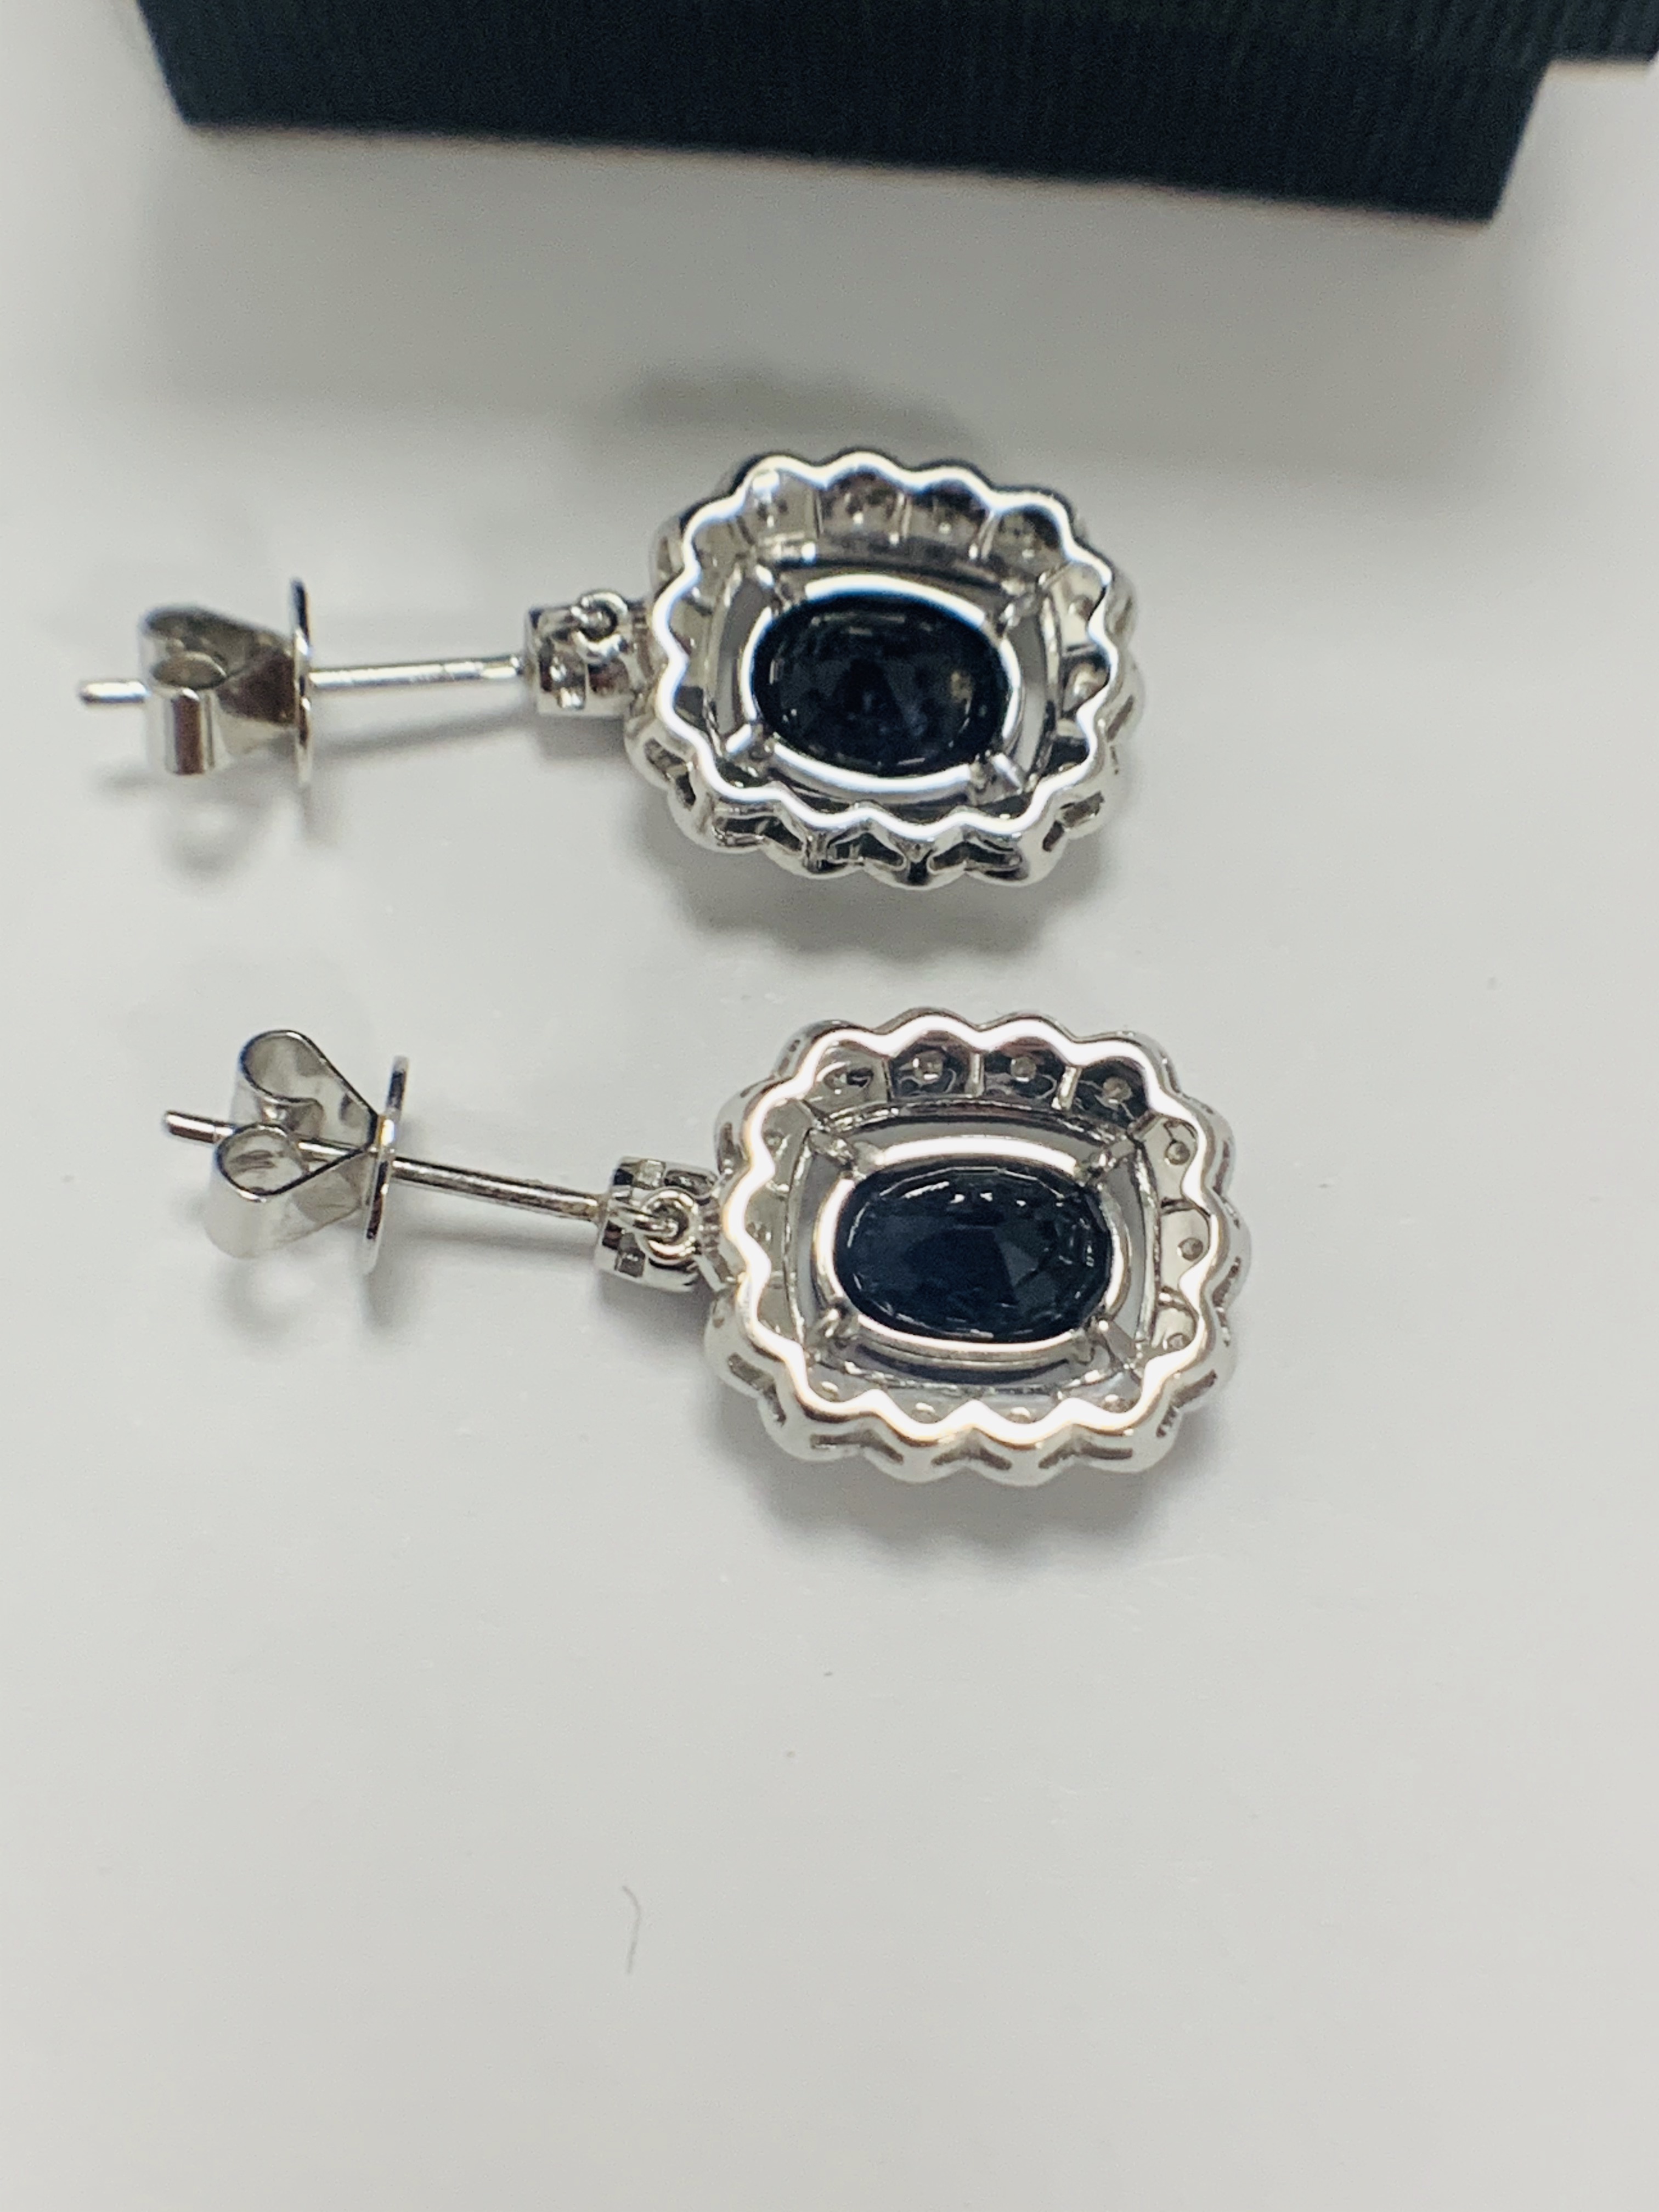 18ct White Gold Sapphire and Diamond earrings featiring, 2 oval cut, dark blue Kashmir Sapphires (4. - Image 6 of 12